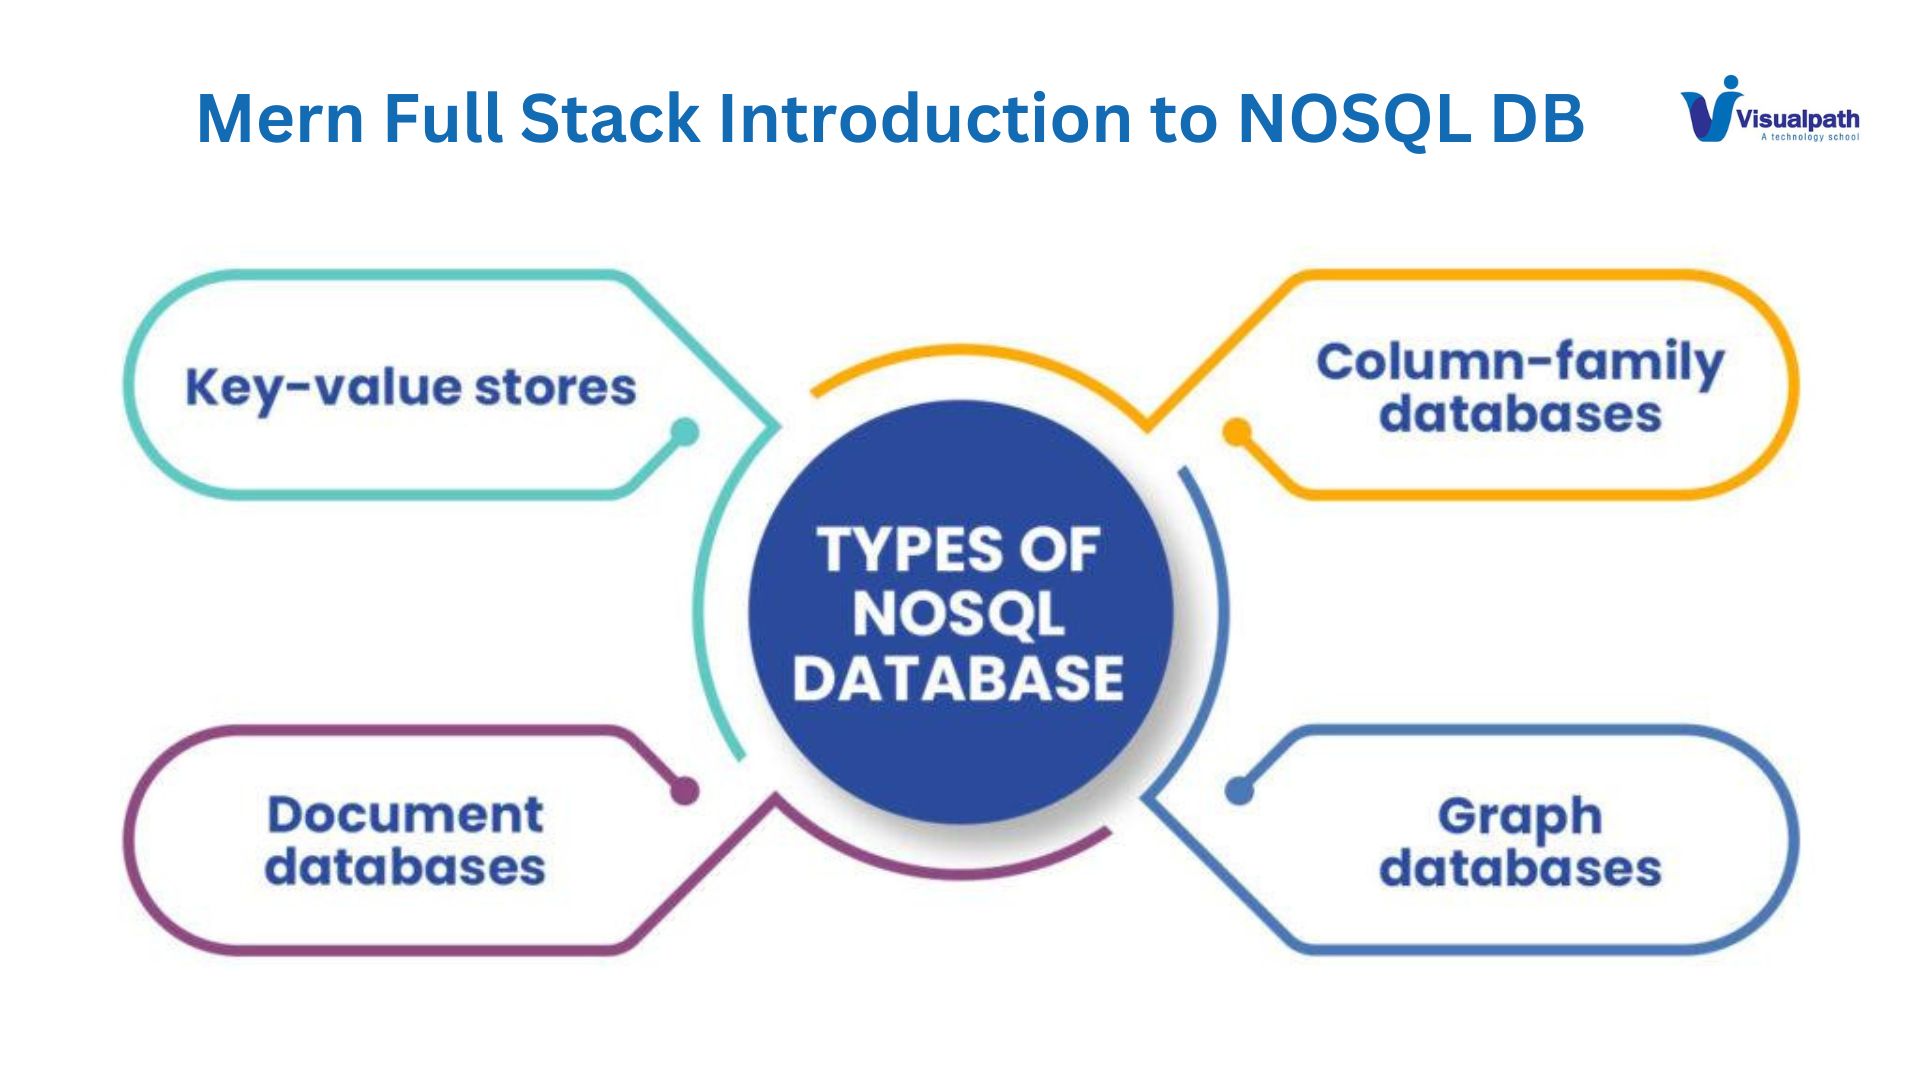 Introduction to NoSQL Databases in MERN